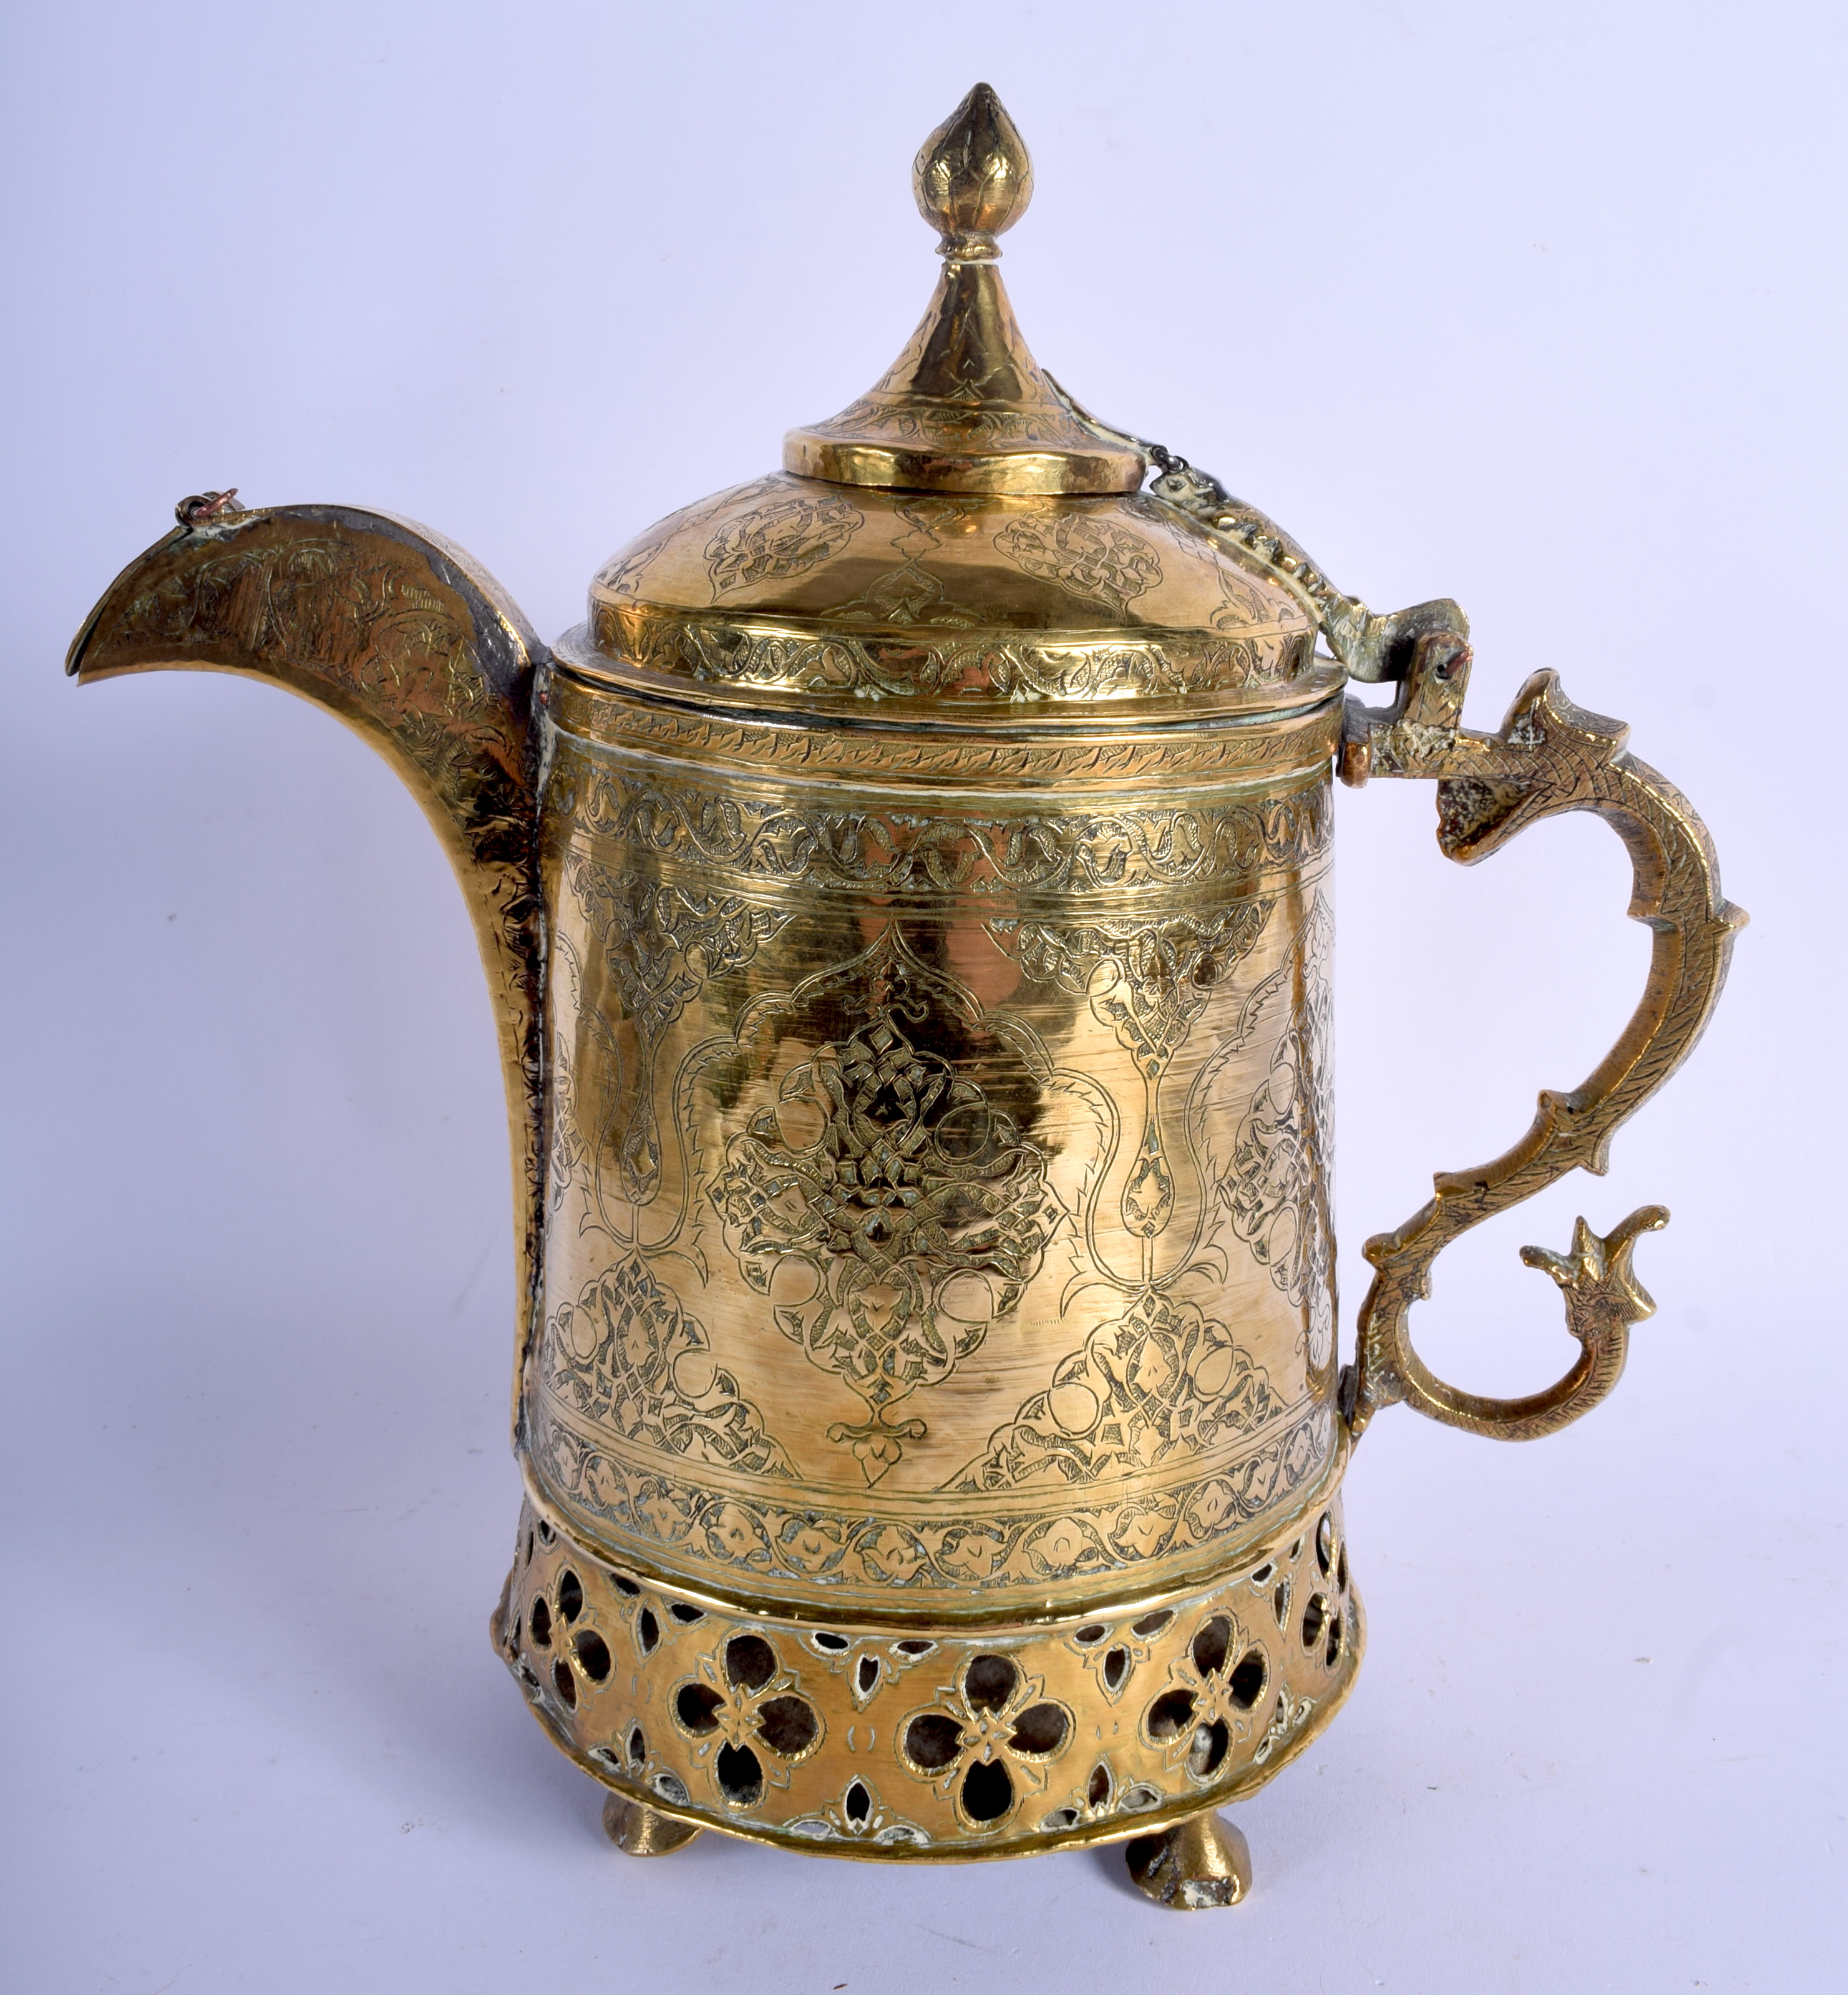 A LARGE 19TH CENTURY MIDDLE EASTERN BRASS KUFIC EWER decorated with foliage and vines. 30 cm x 22 c - Image 3 of 12